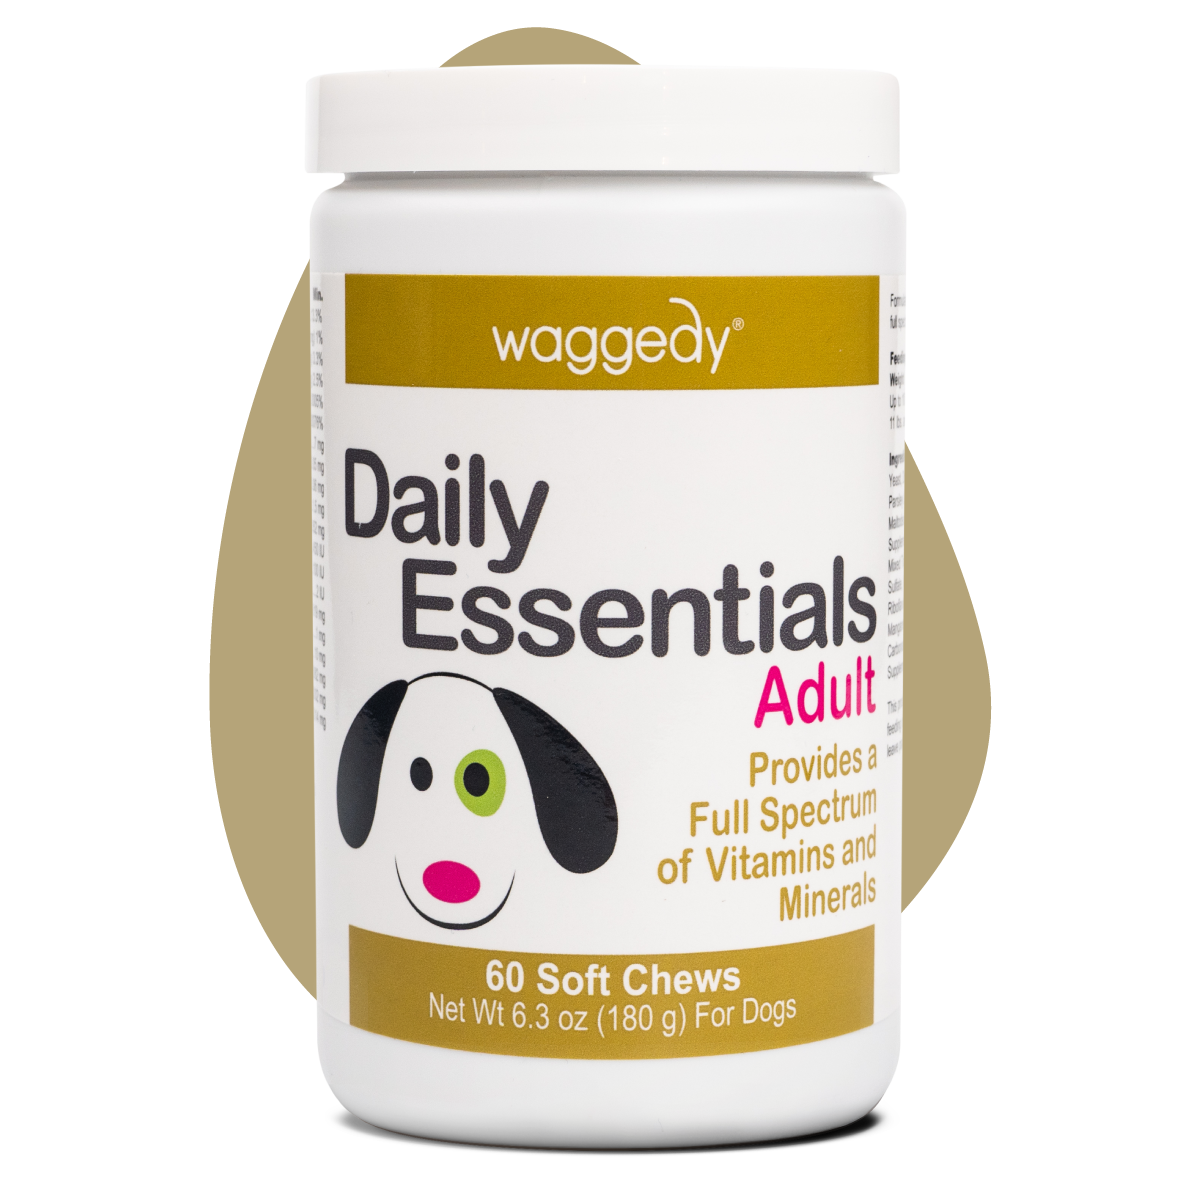 Daily Essentials Adult